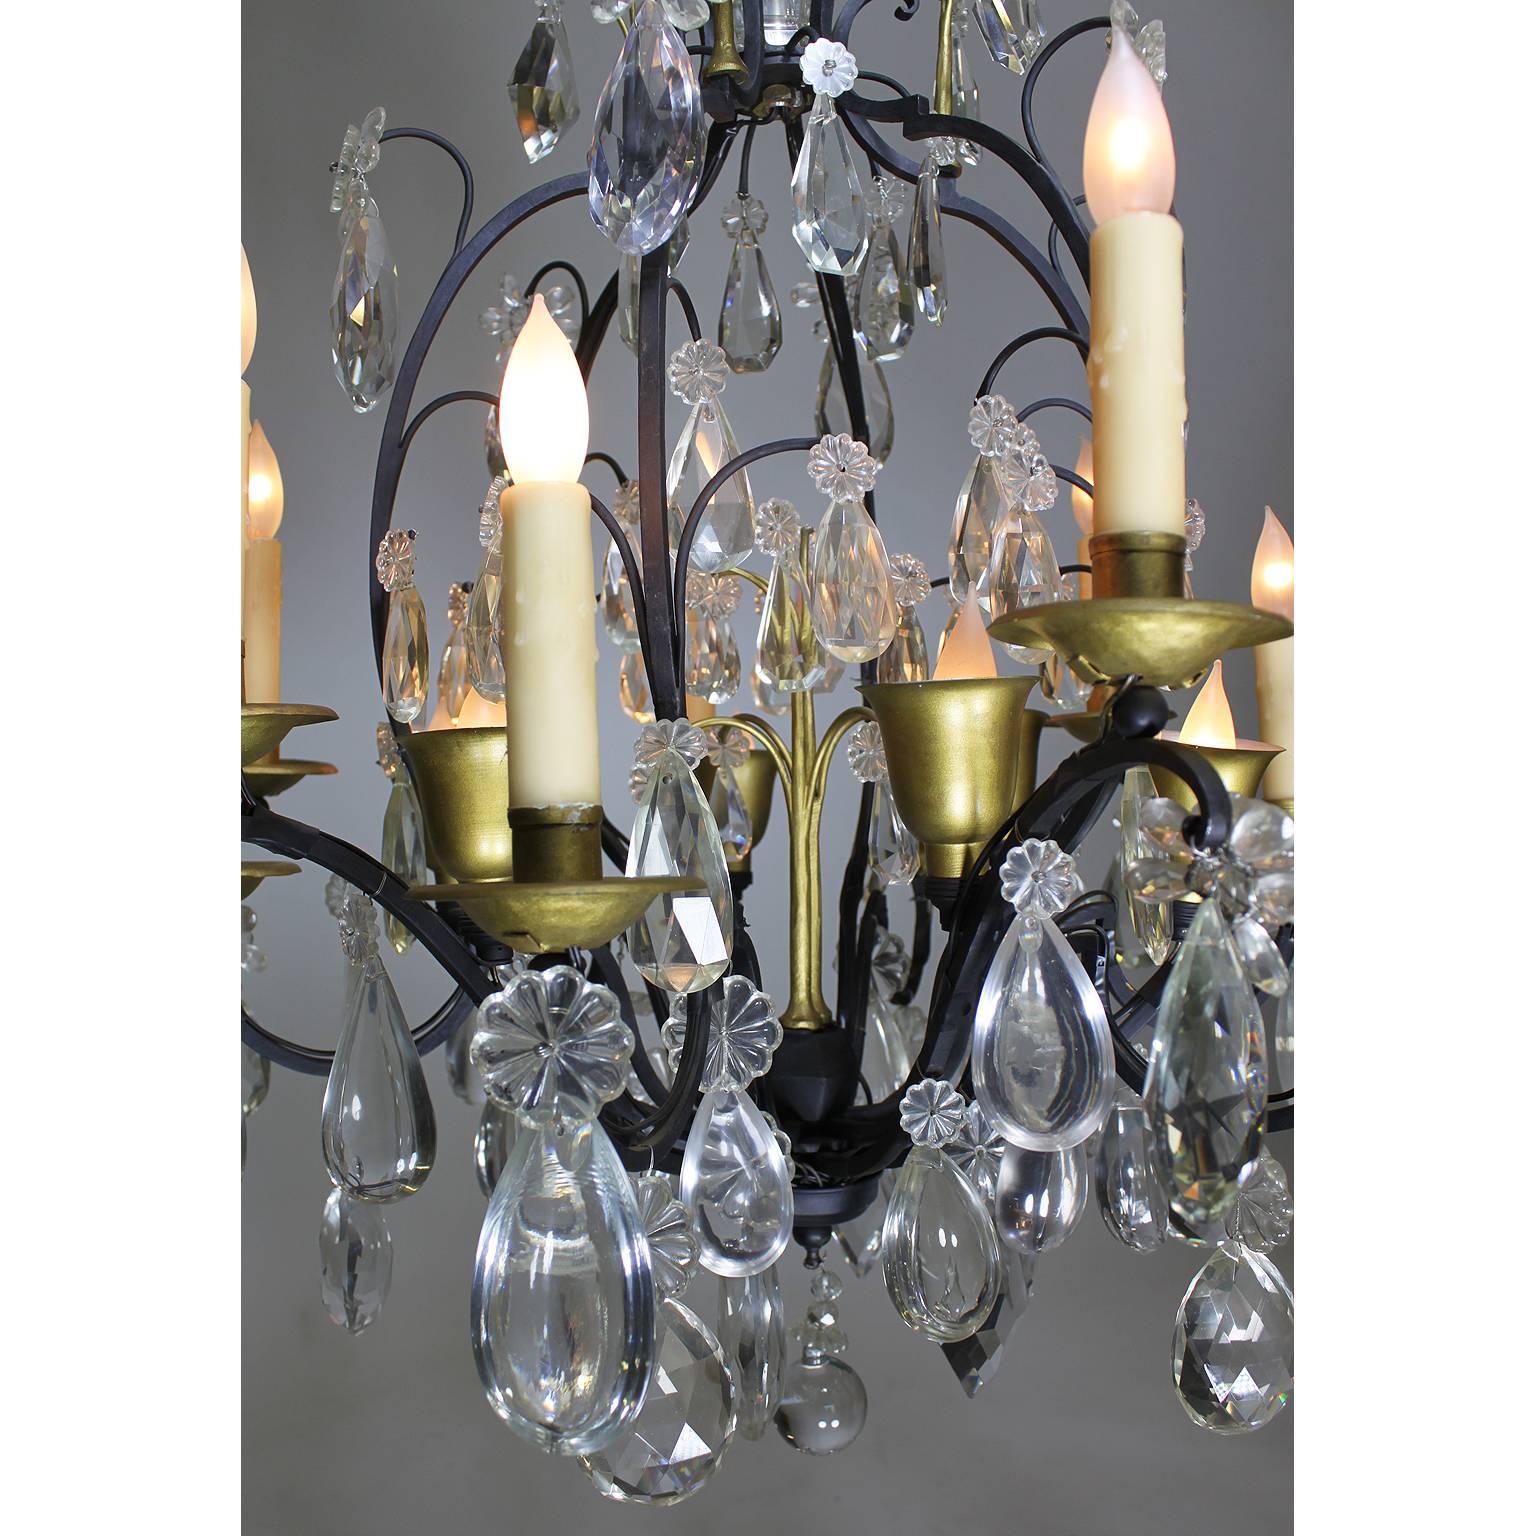 19th-20th Century Louis XV Style Wrought Iron Eighteen-Light Crystal Chandelier In Good Condition For Sale In Los Angeles, CA